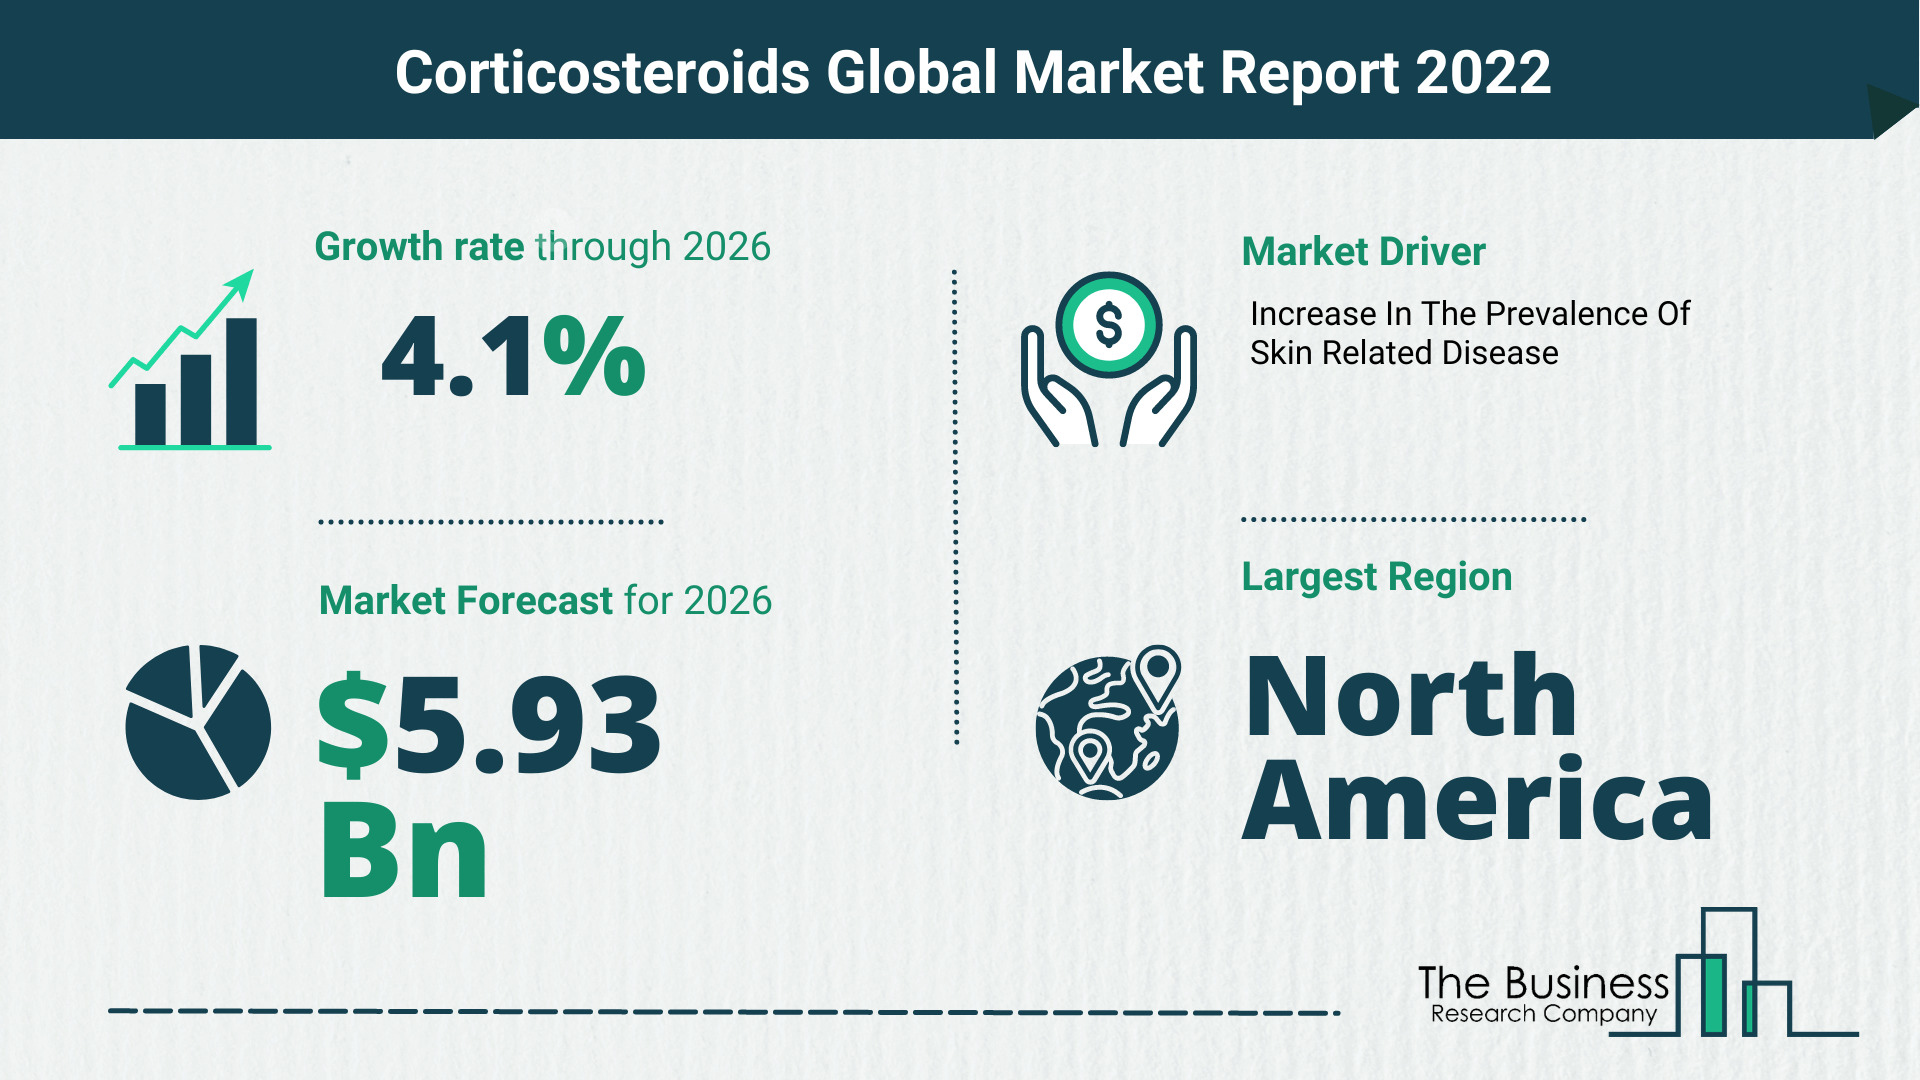 Global Corticosteroids Market